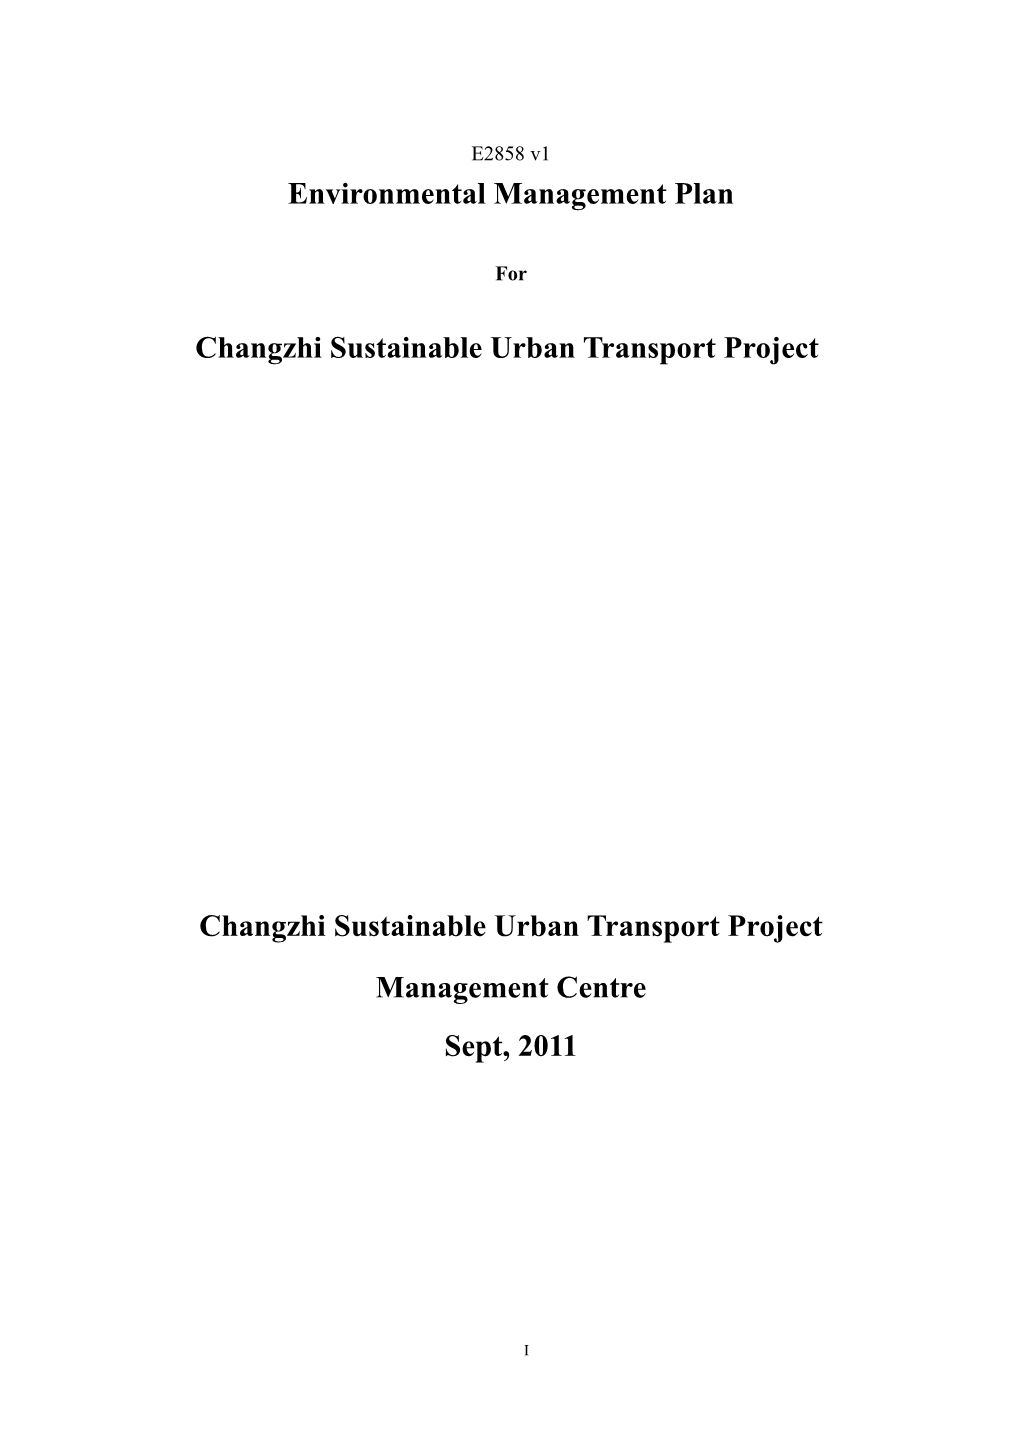 World Bank Loan Changzhi Sustainable Urban Transport Project